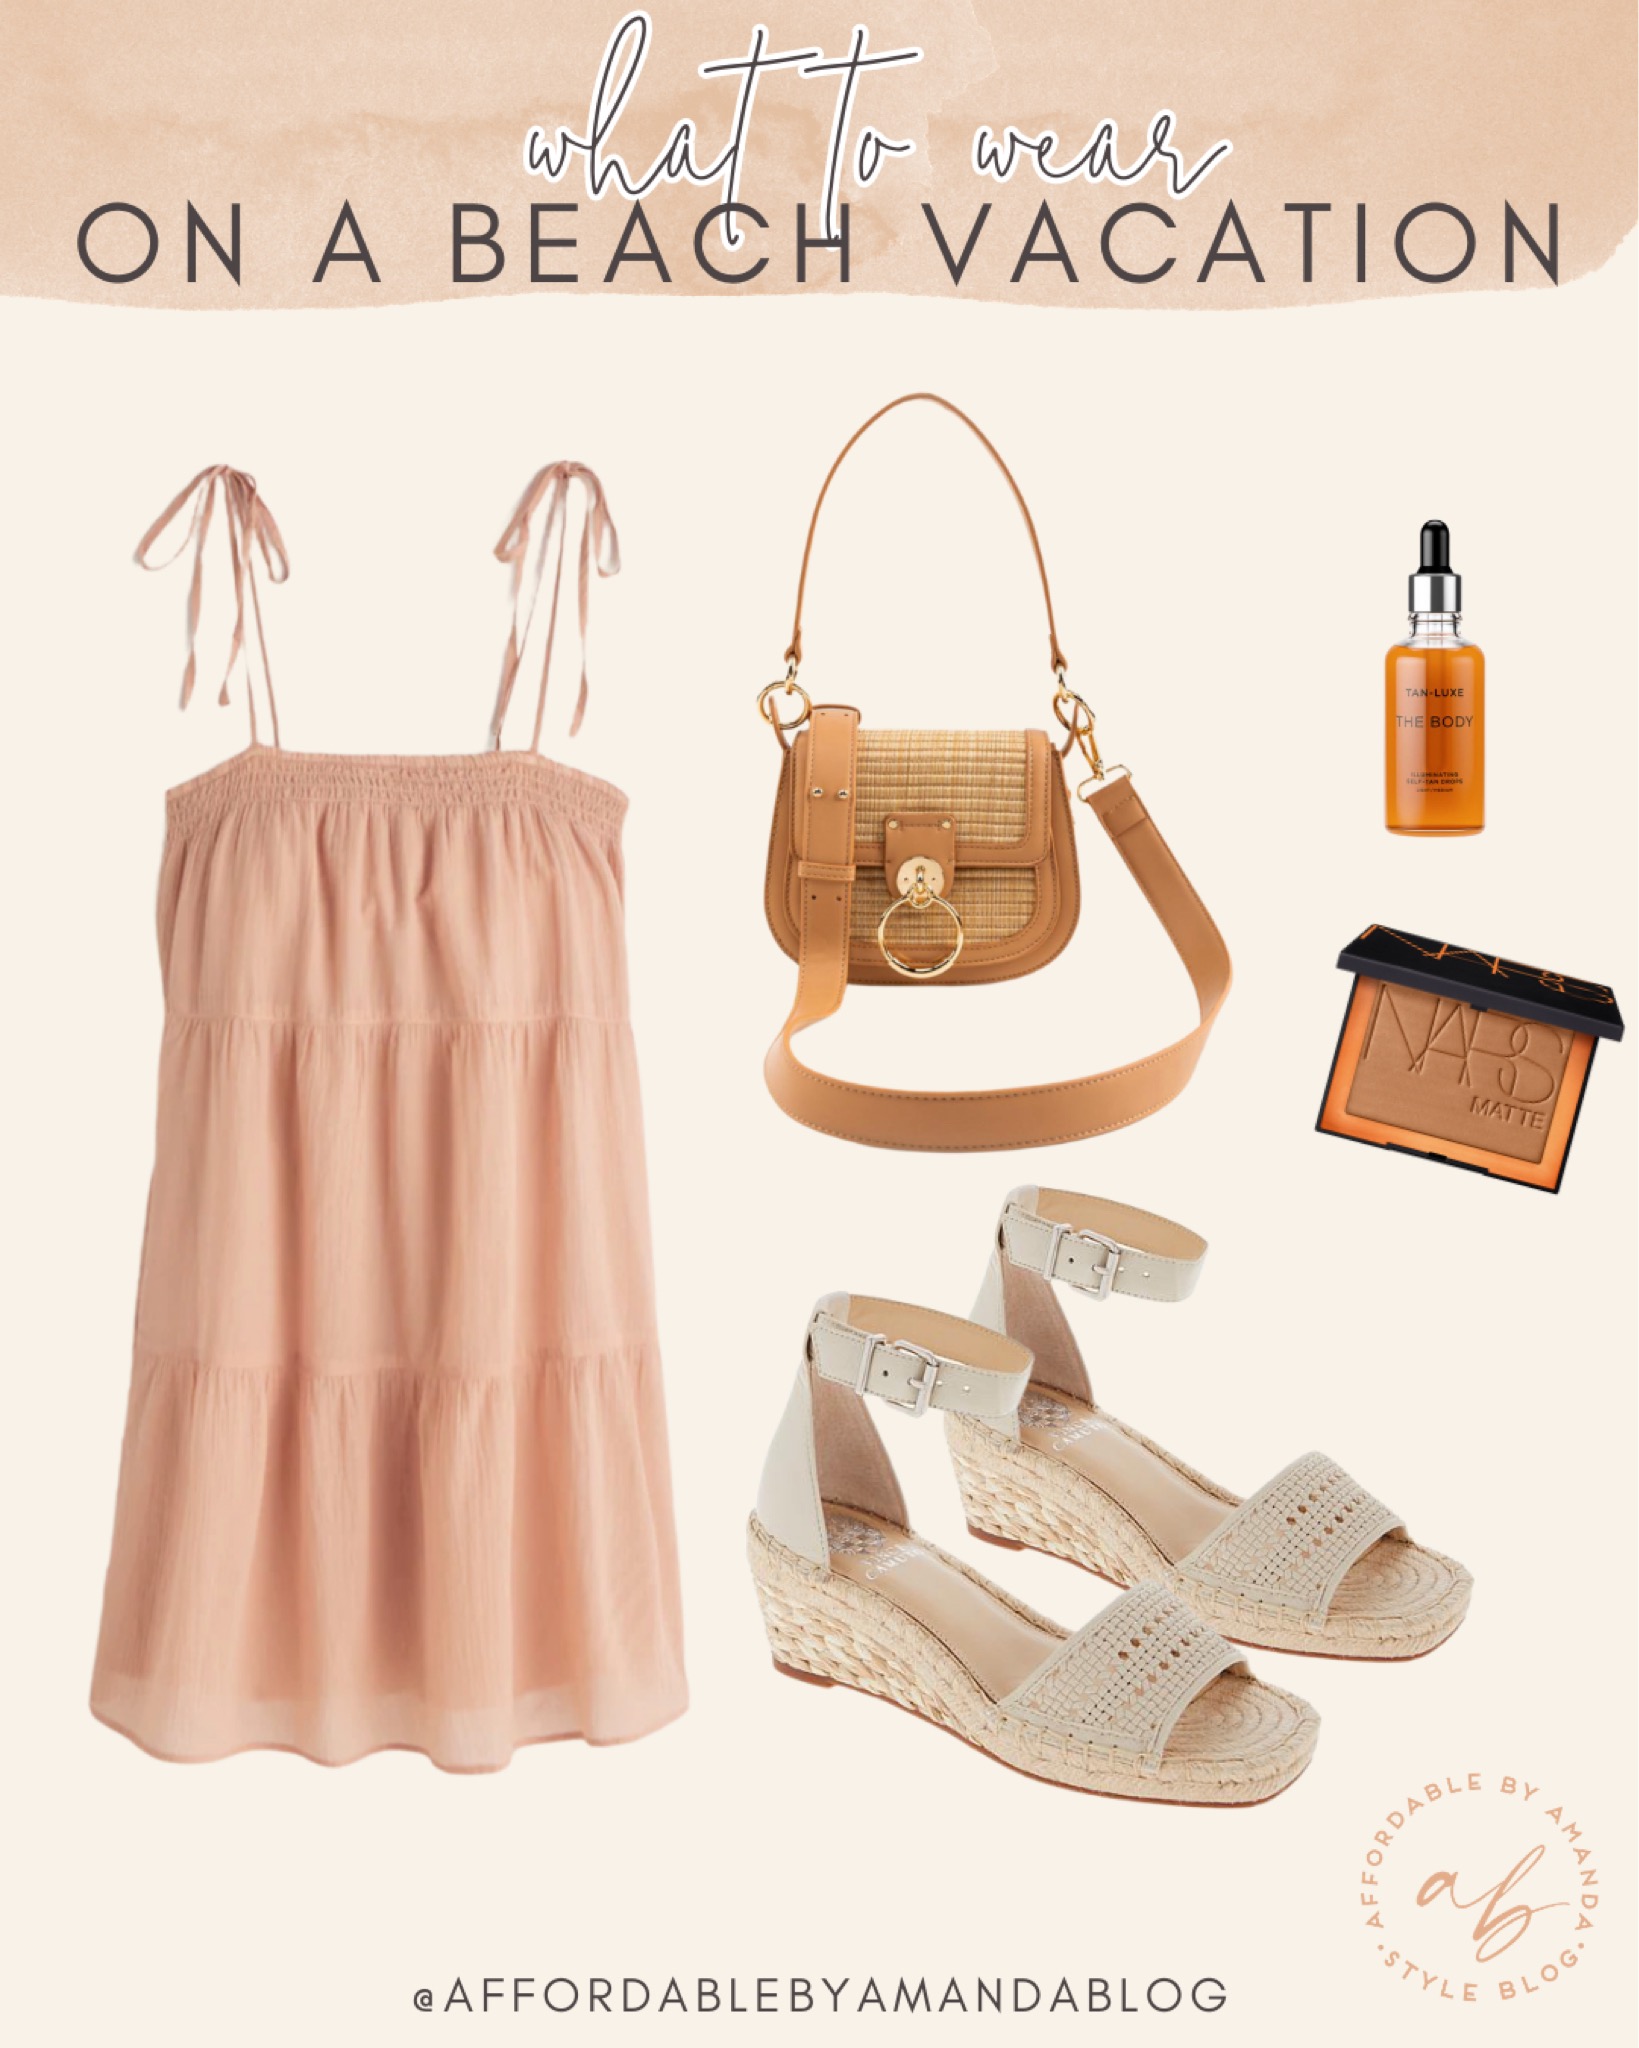 Abercrombie & Fitch Tie-Strap Trapeze Mini Dress - Affordable by Amanda shares her beach vacation outfit ideas. 